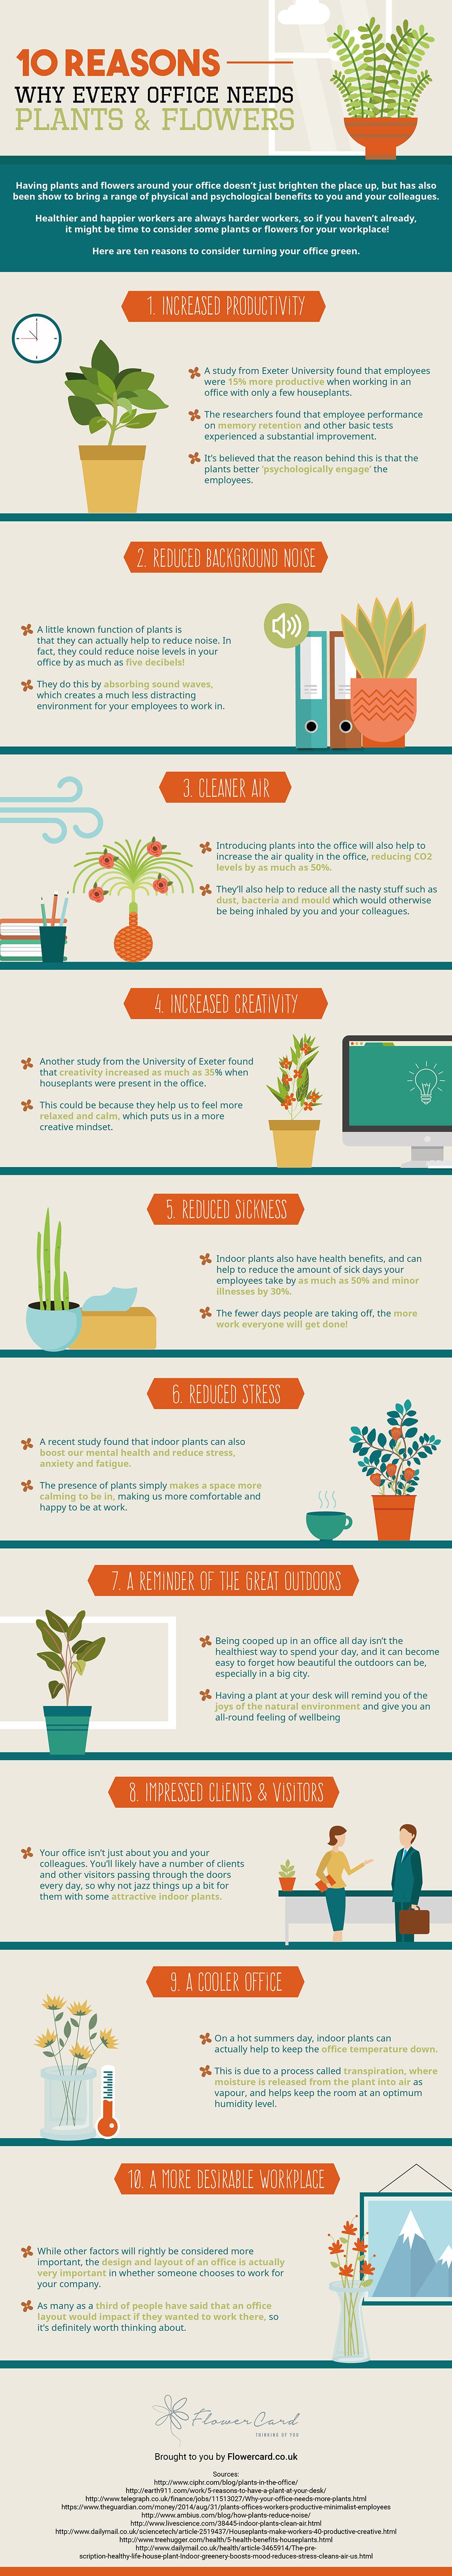 Ten Reasons Why Every Office Needs Plants 